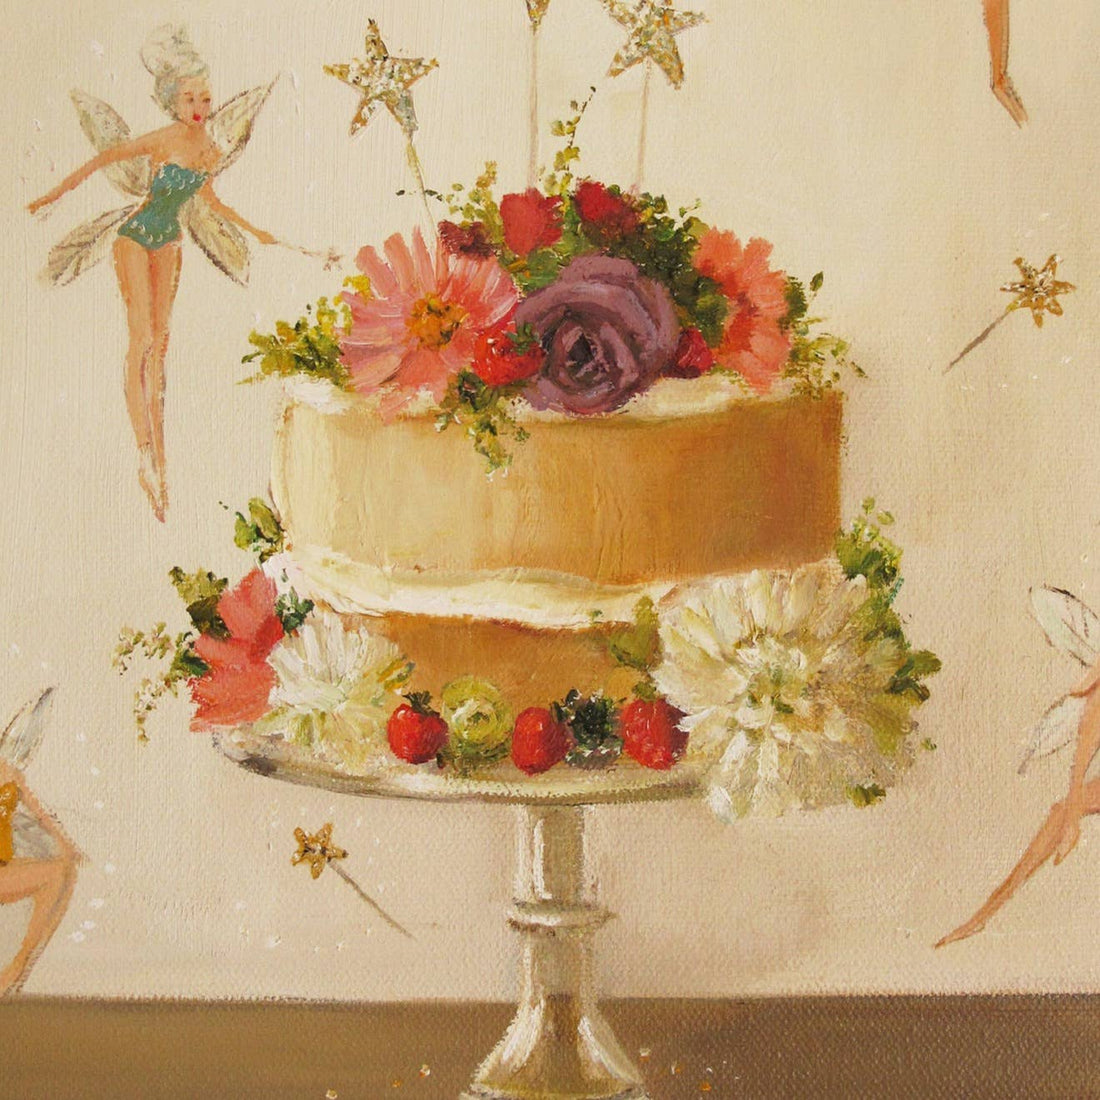 A Fairy Cake Small Art Print by Janet Hill, depicting a cake adorned with flowers and berries, encircled by illustrations of fairies and golden stars.